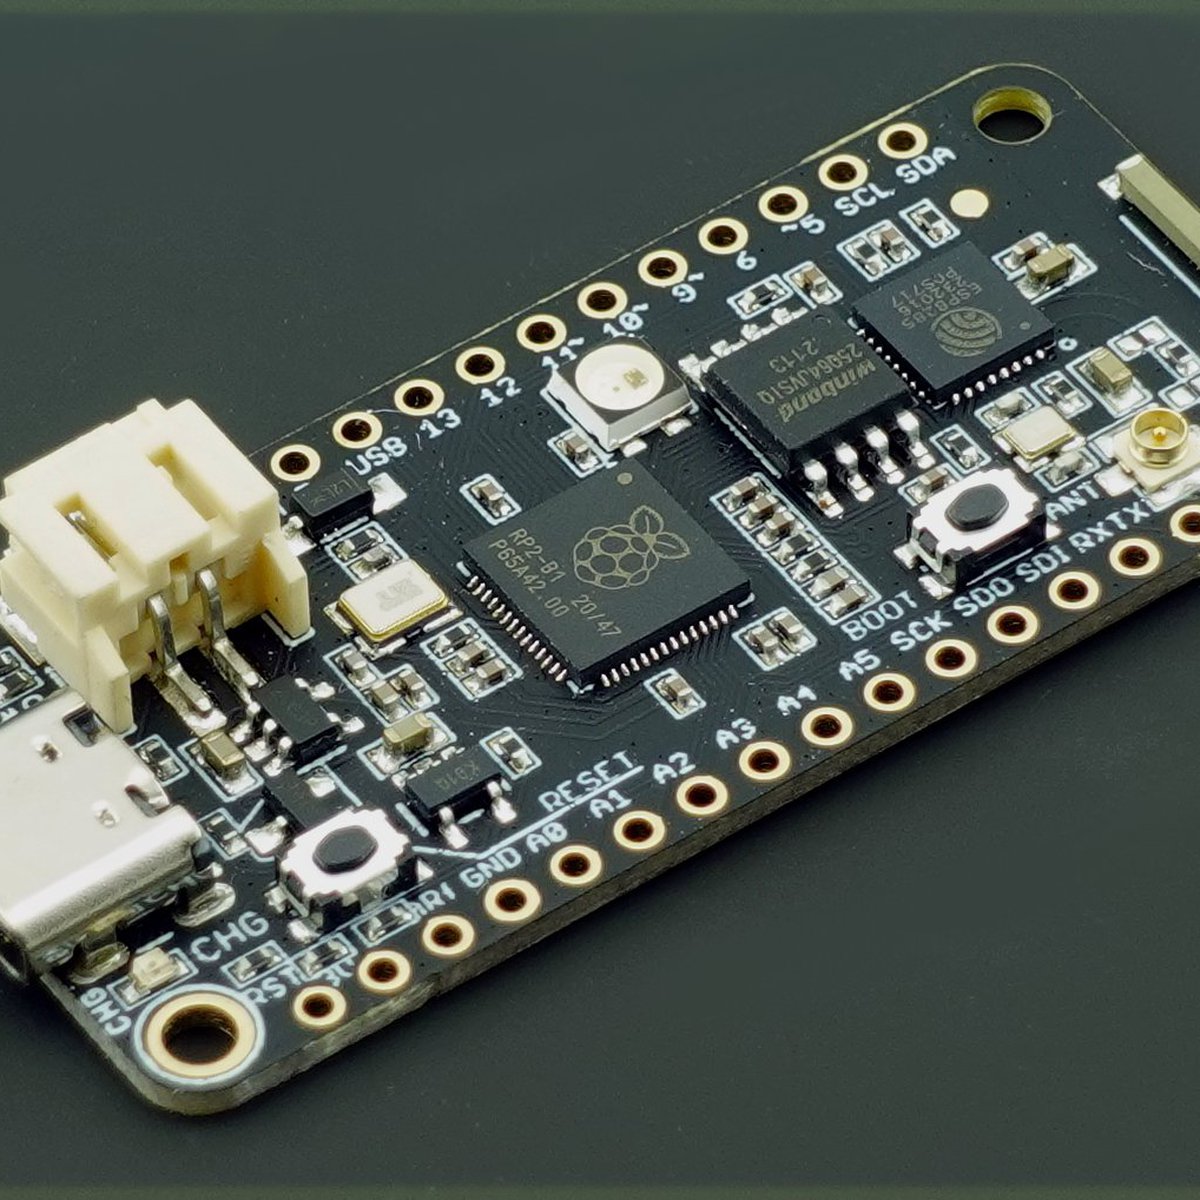 Challenger RP2040 WiFi from Invector Labs on Tindie